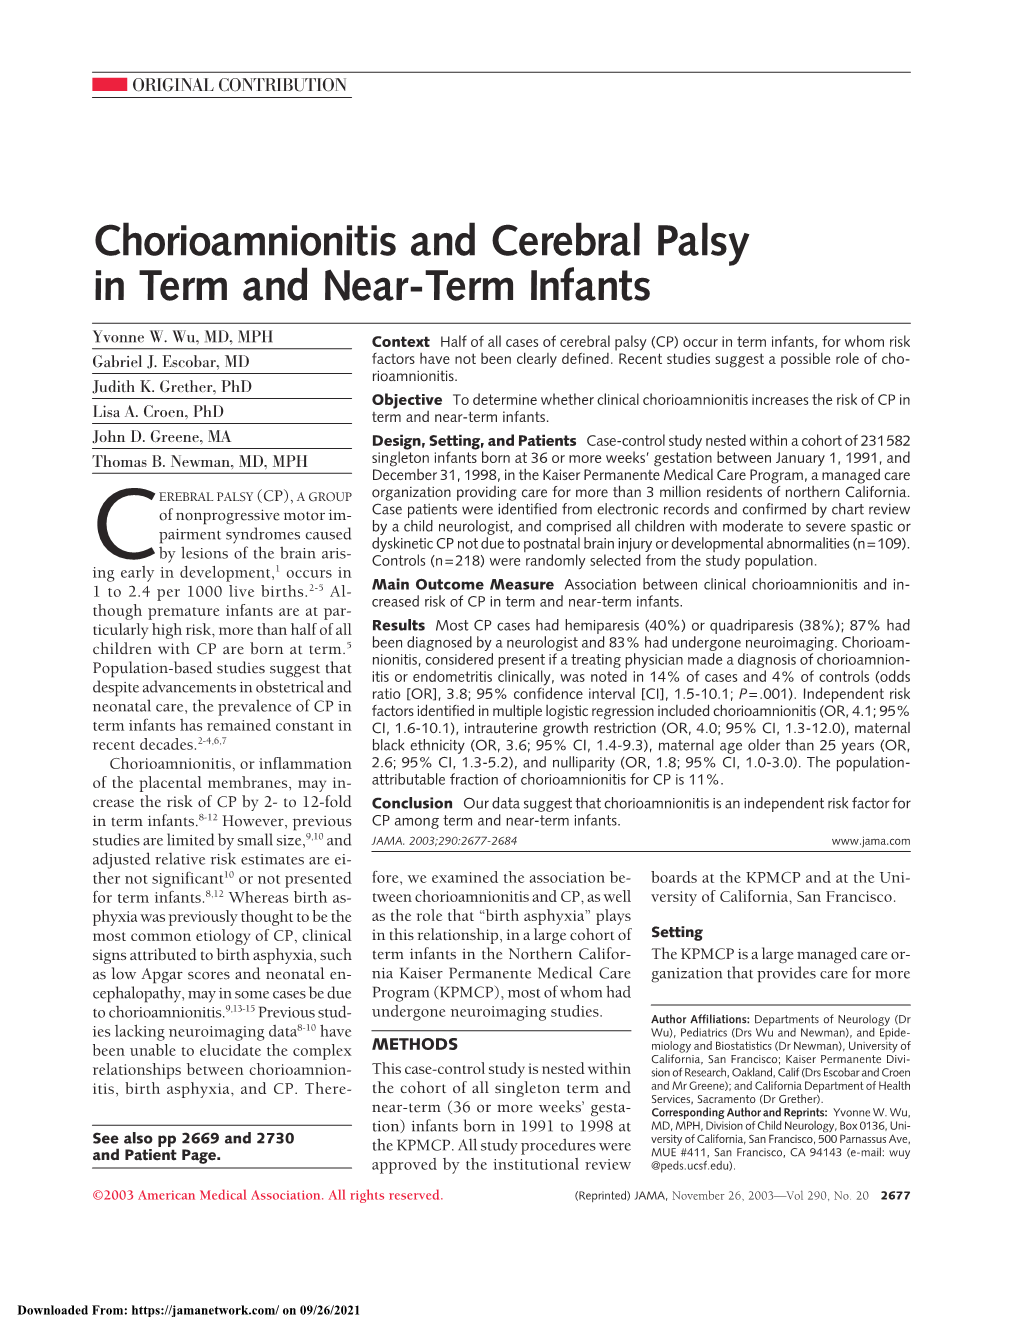 Chorioamnionitis and Cerebral Palsy in Term and Near-Term Infants